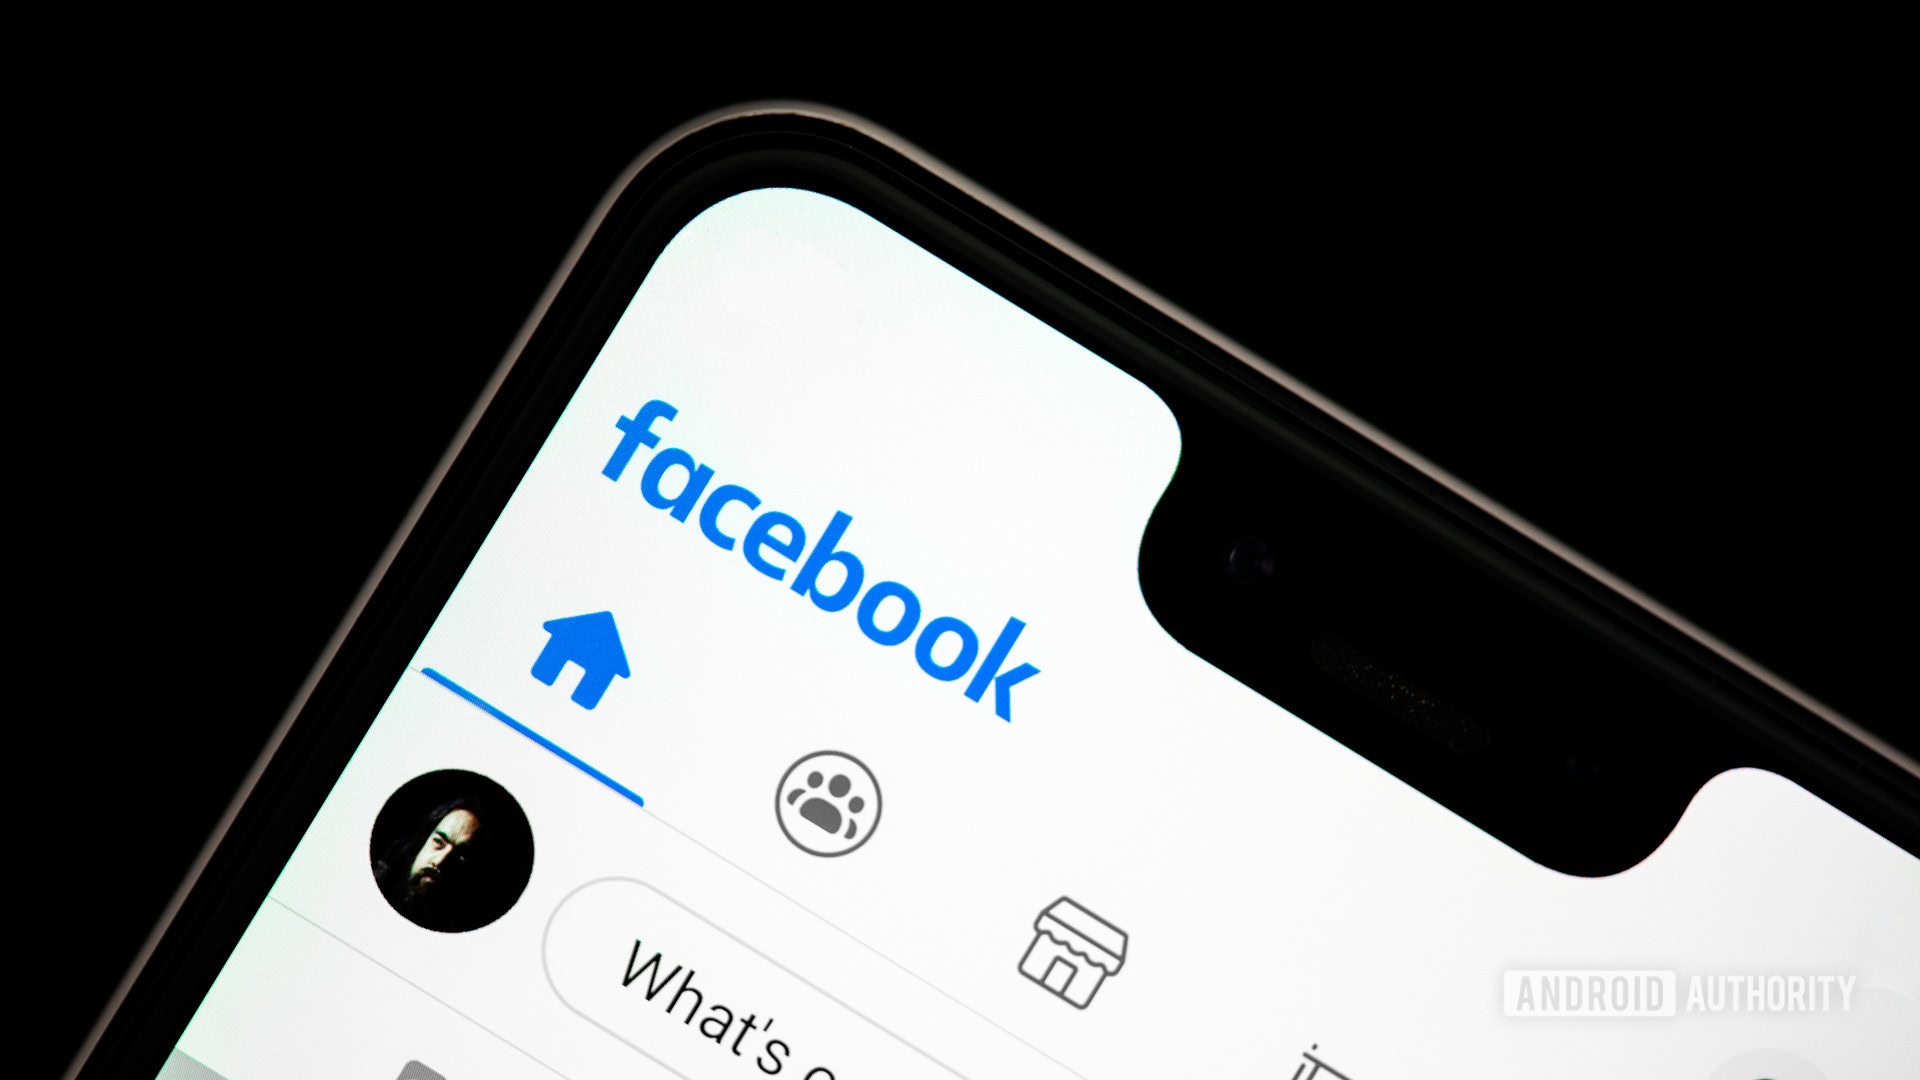 Facebook vs Facebook Lite apps: What are the key differences?